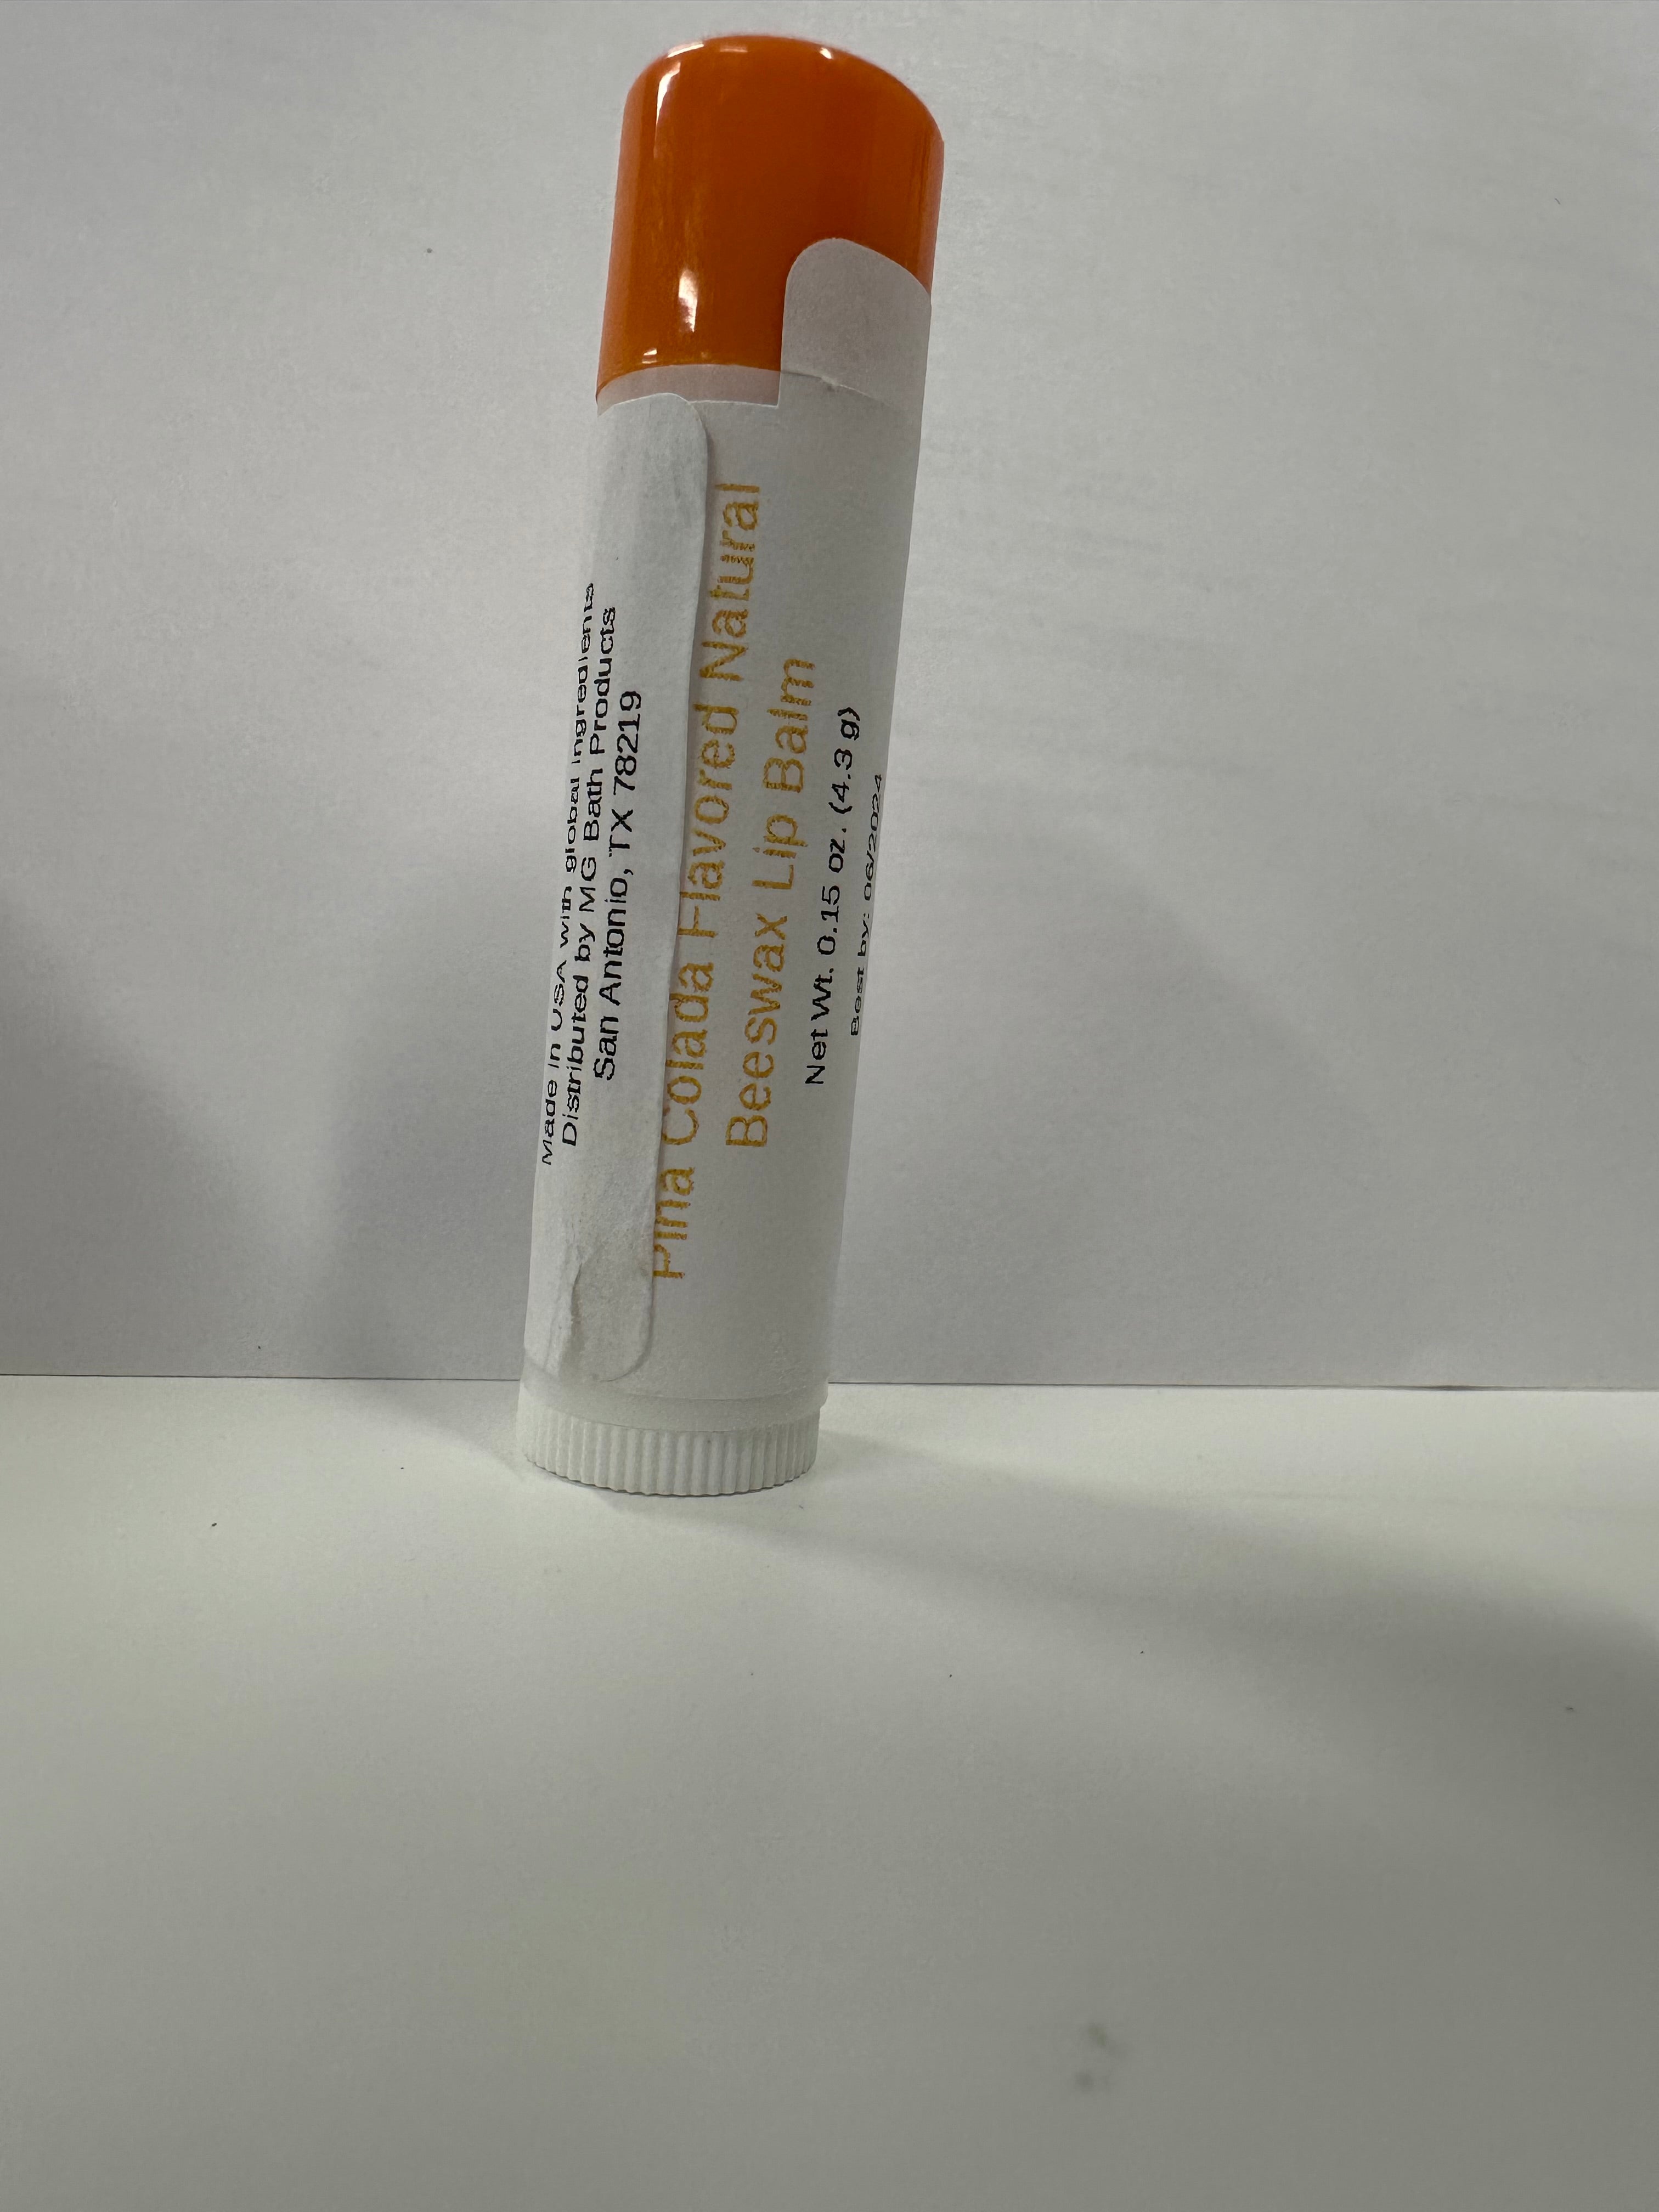 Lip balm in tube with a orange colored cap on it.